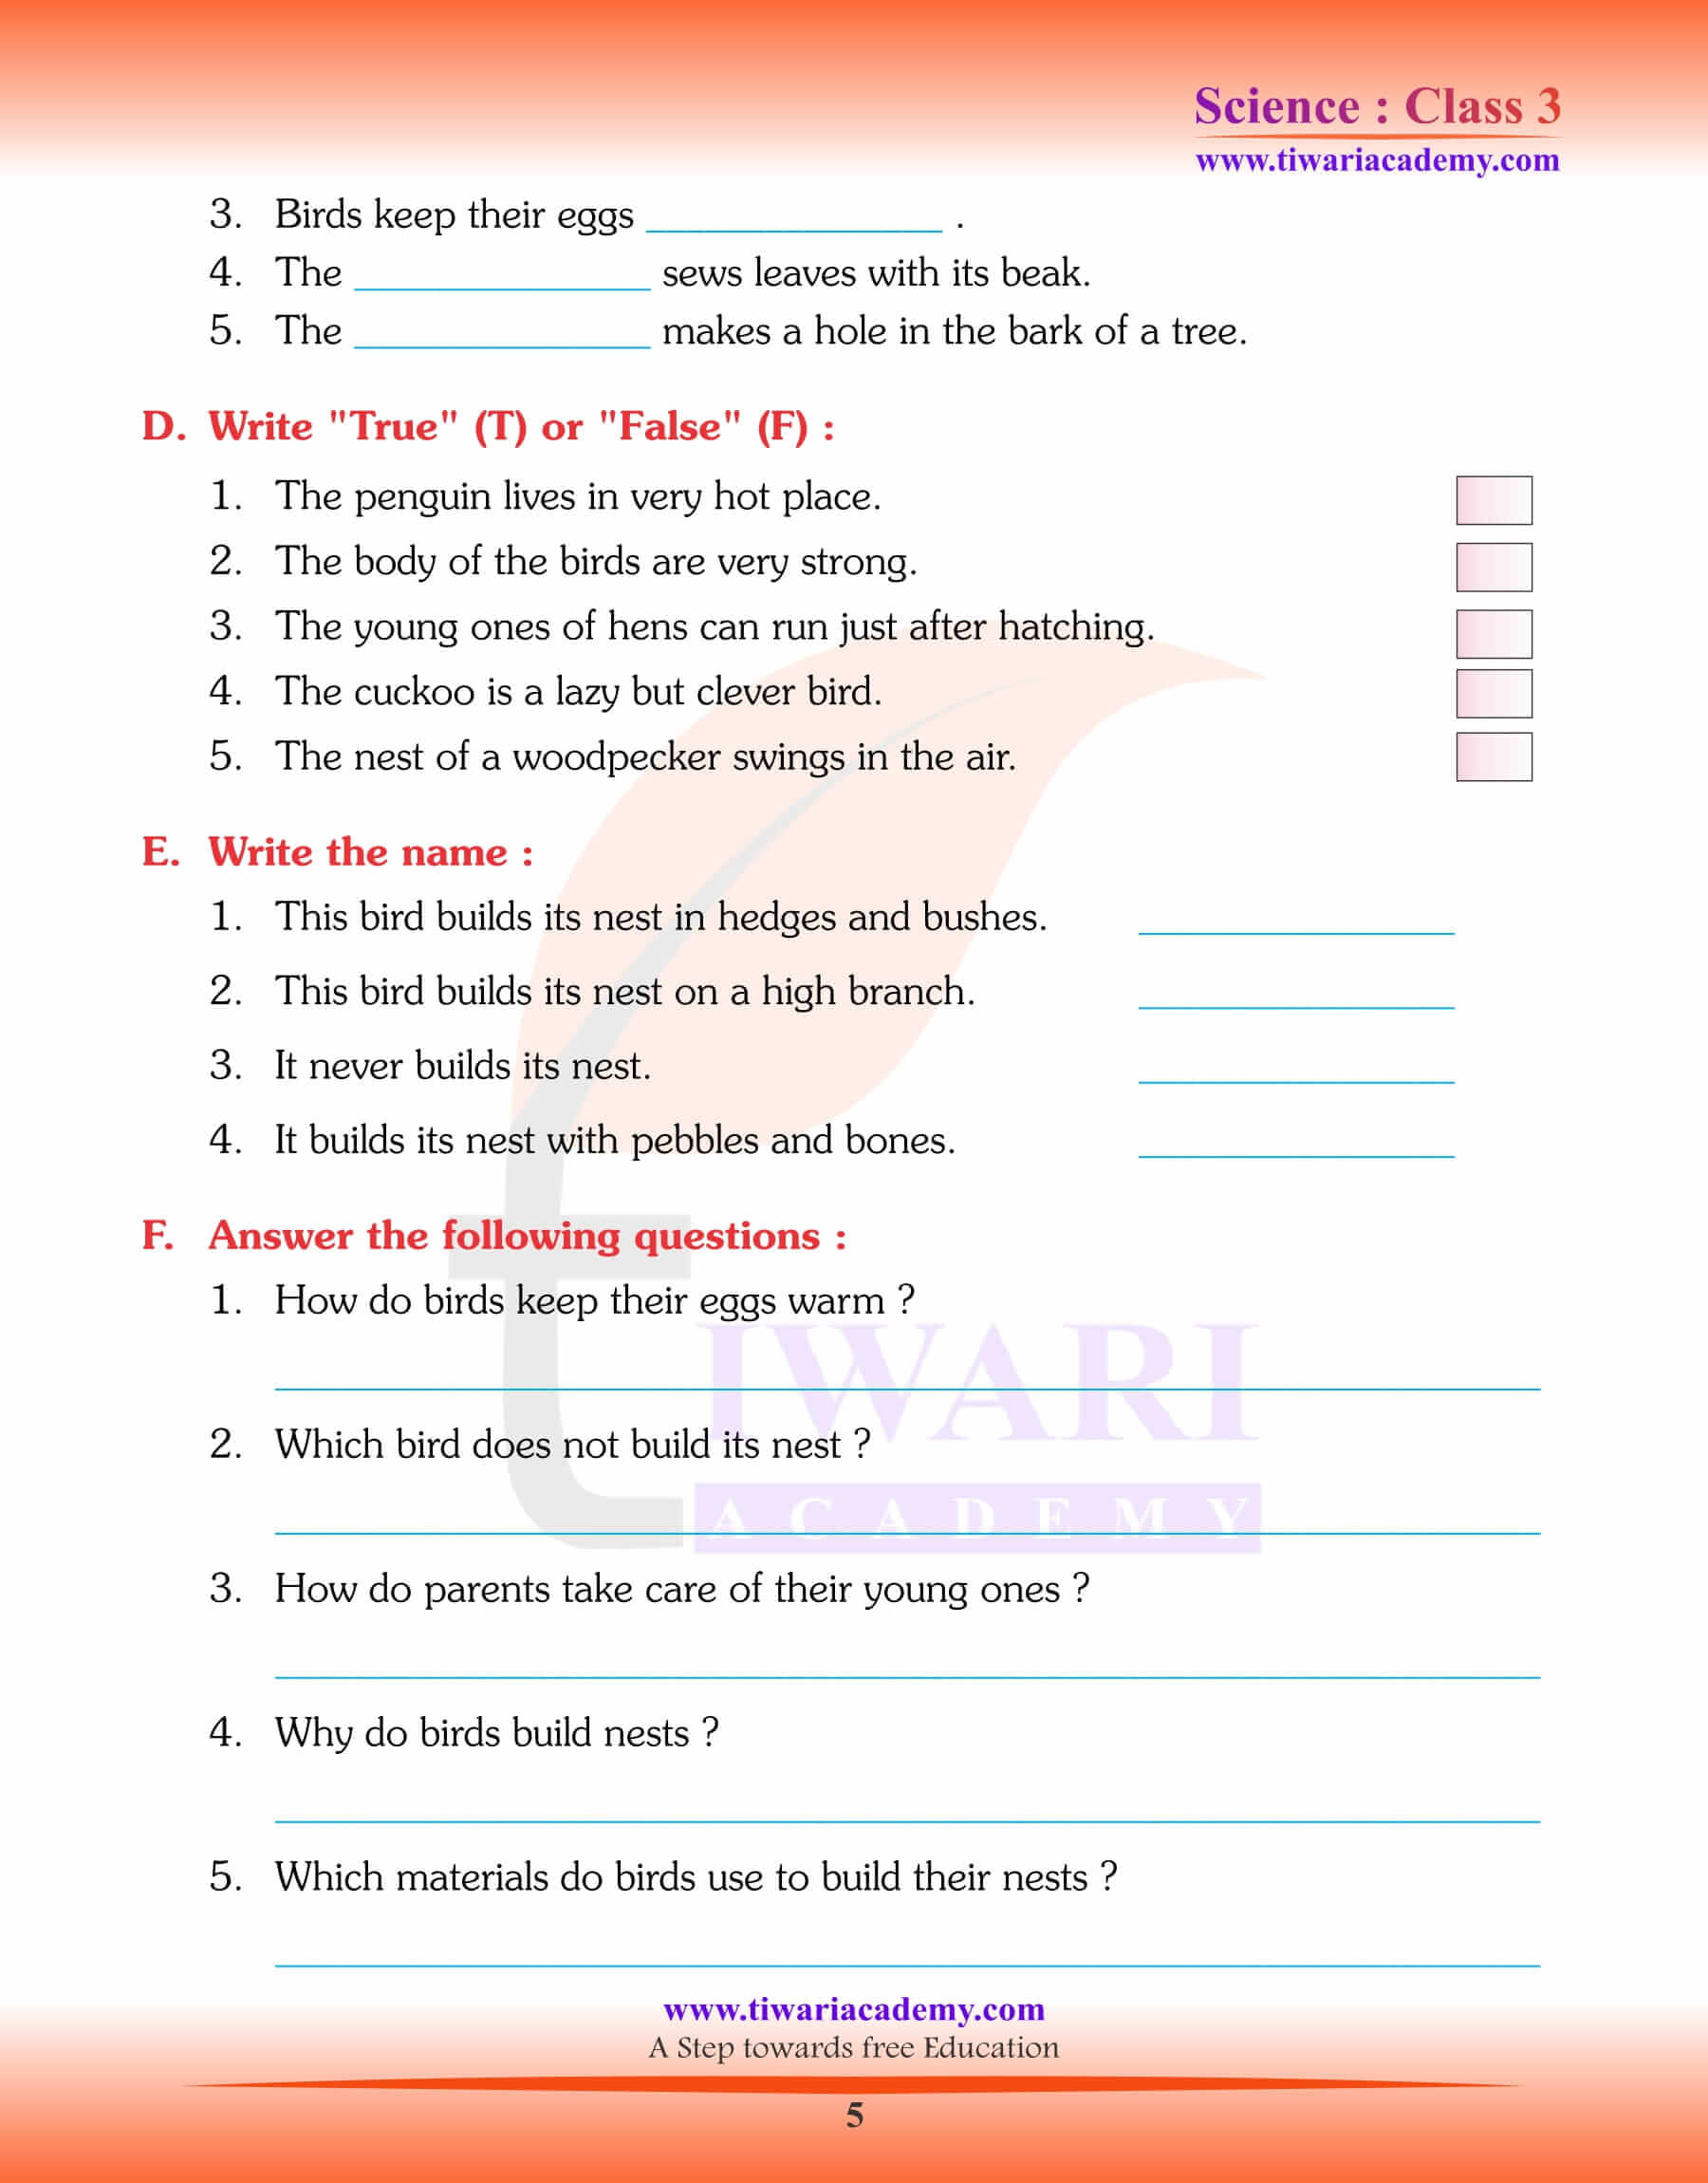 Class 3 Science Chapter 4 Nestling Habits of Birds question answers